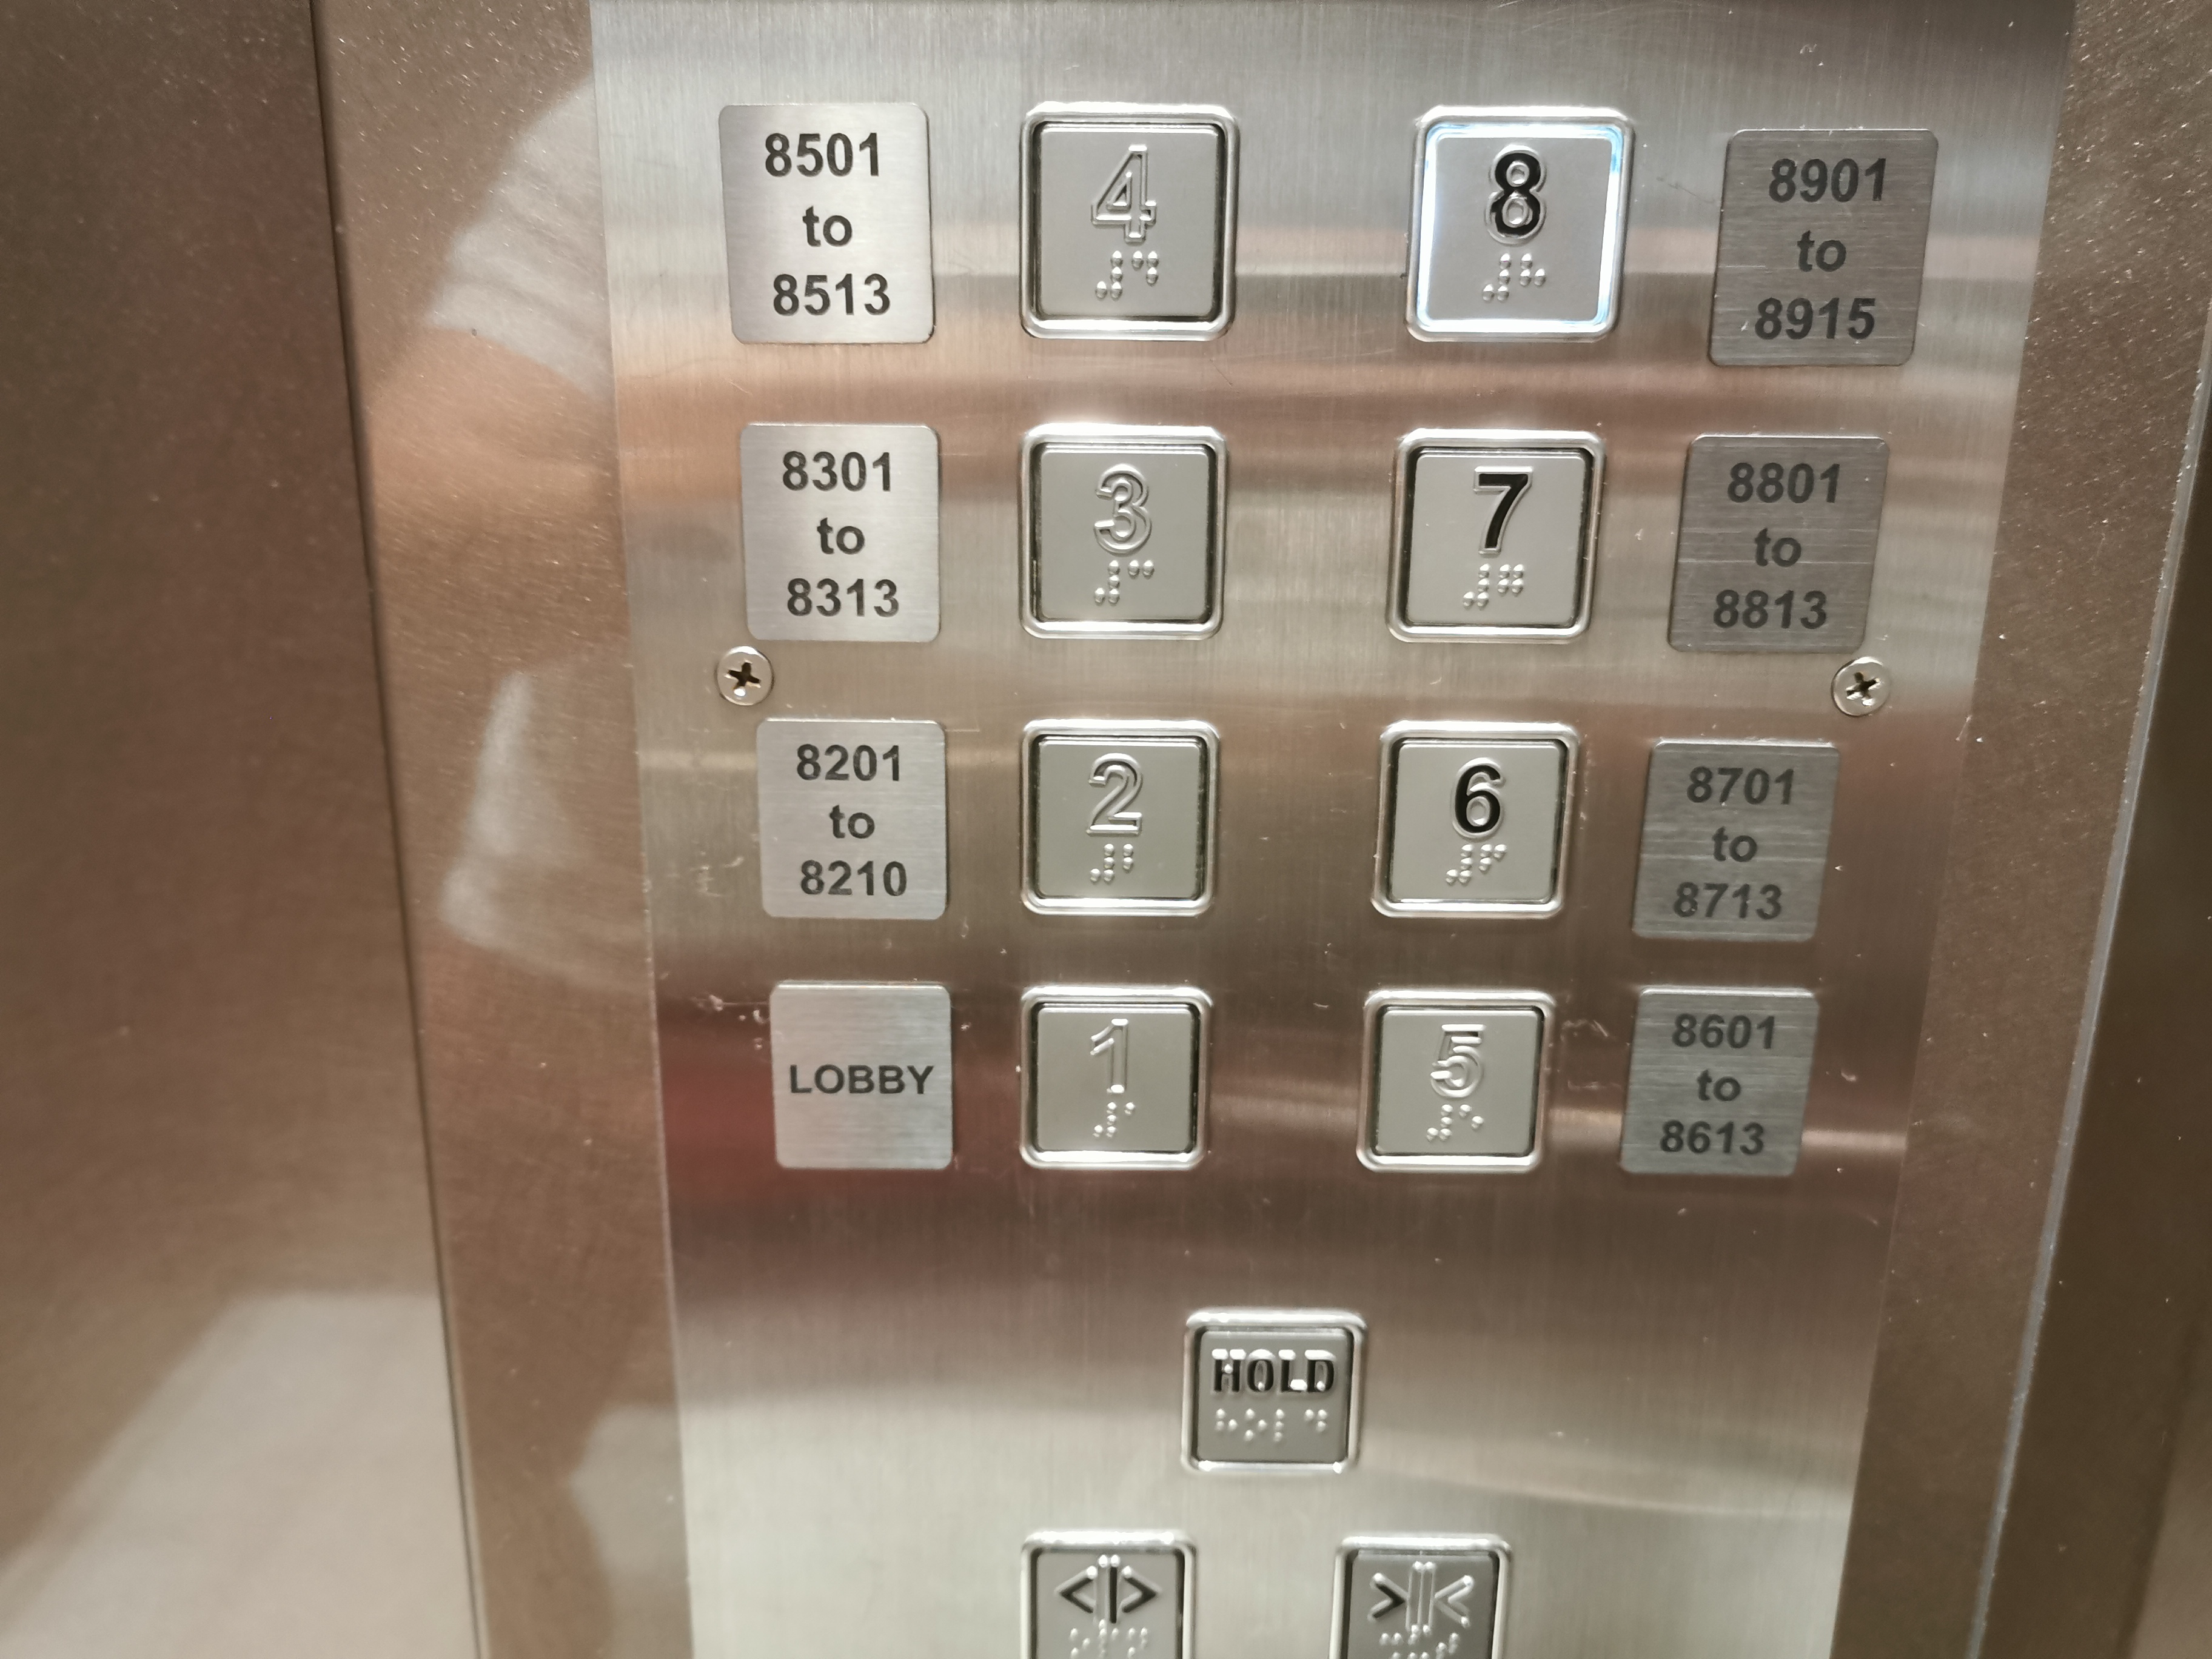 Ji Hotel Lift: All rooms start with digit "8"